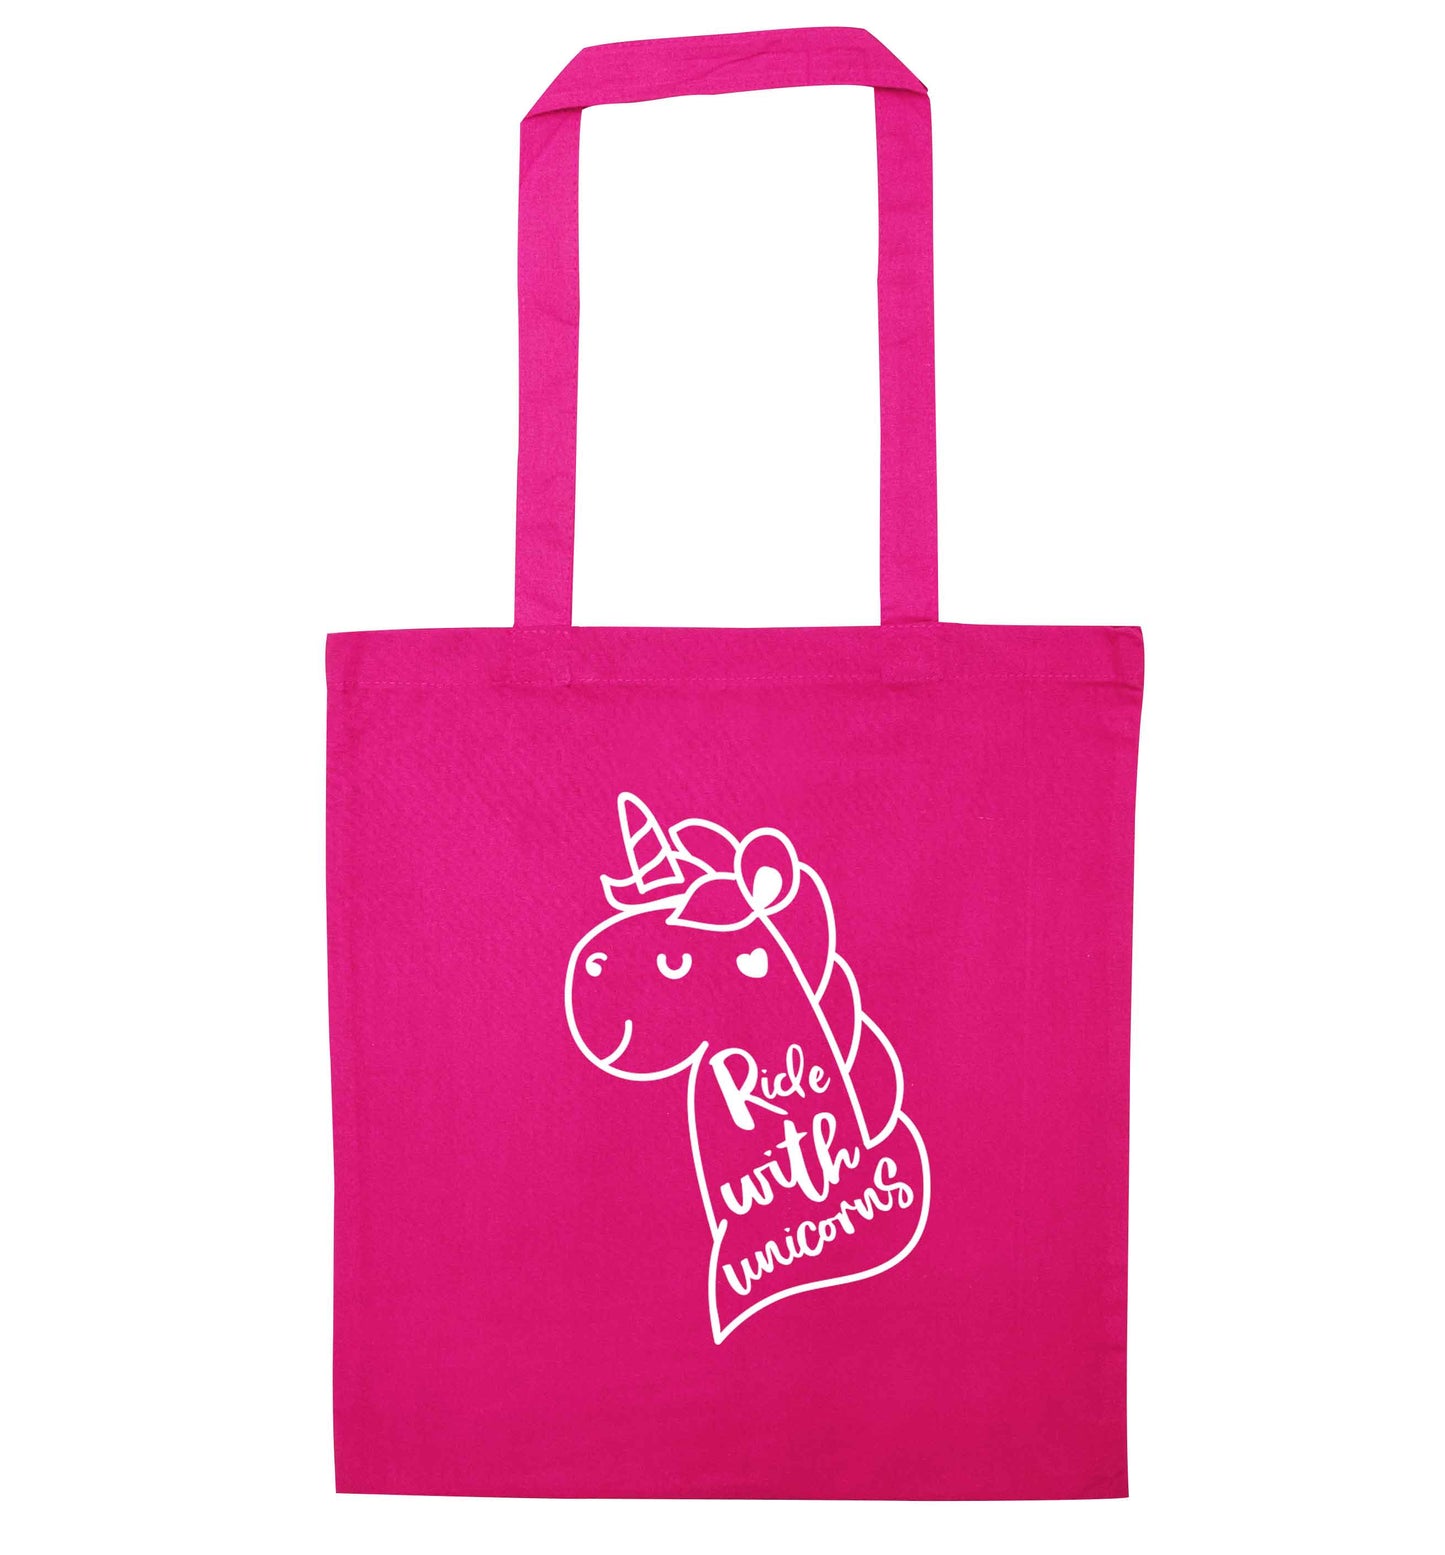 Ride with unicorns pink tote bag